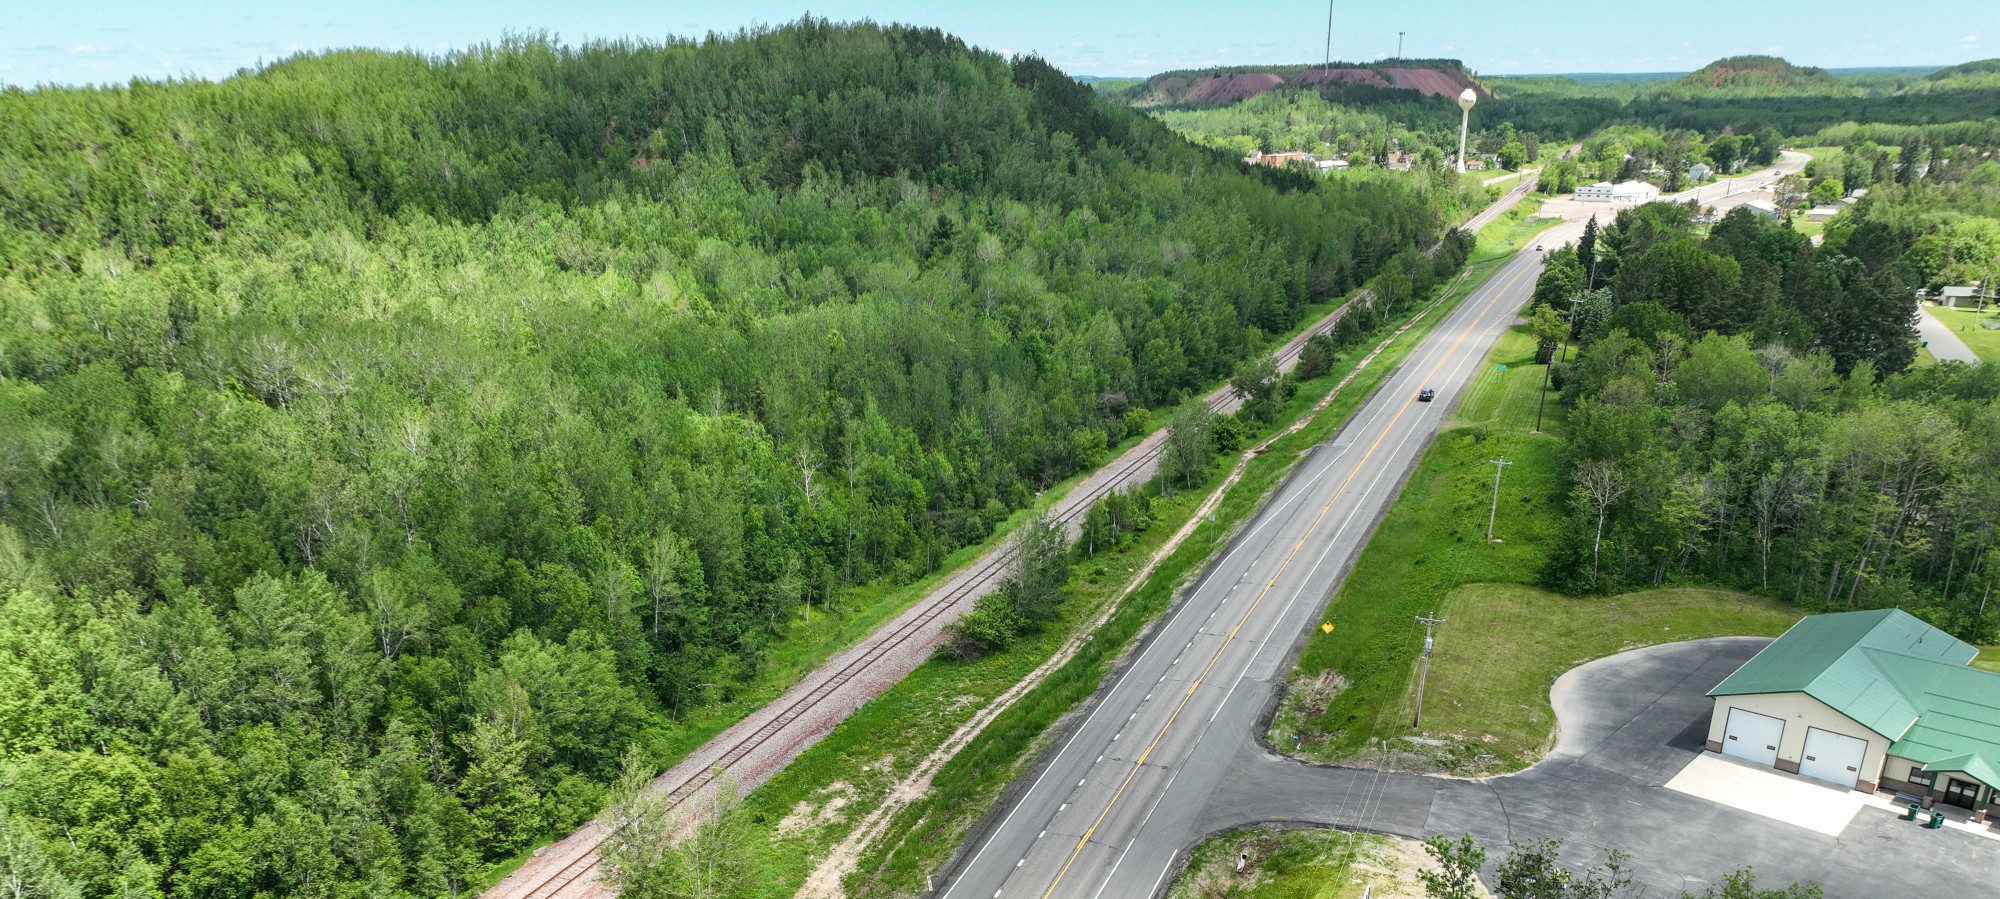 Aerial view of roadway through lush green forest